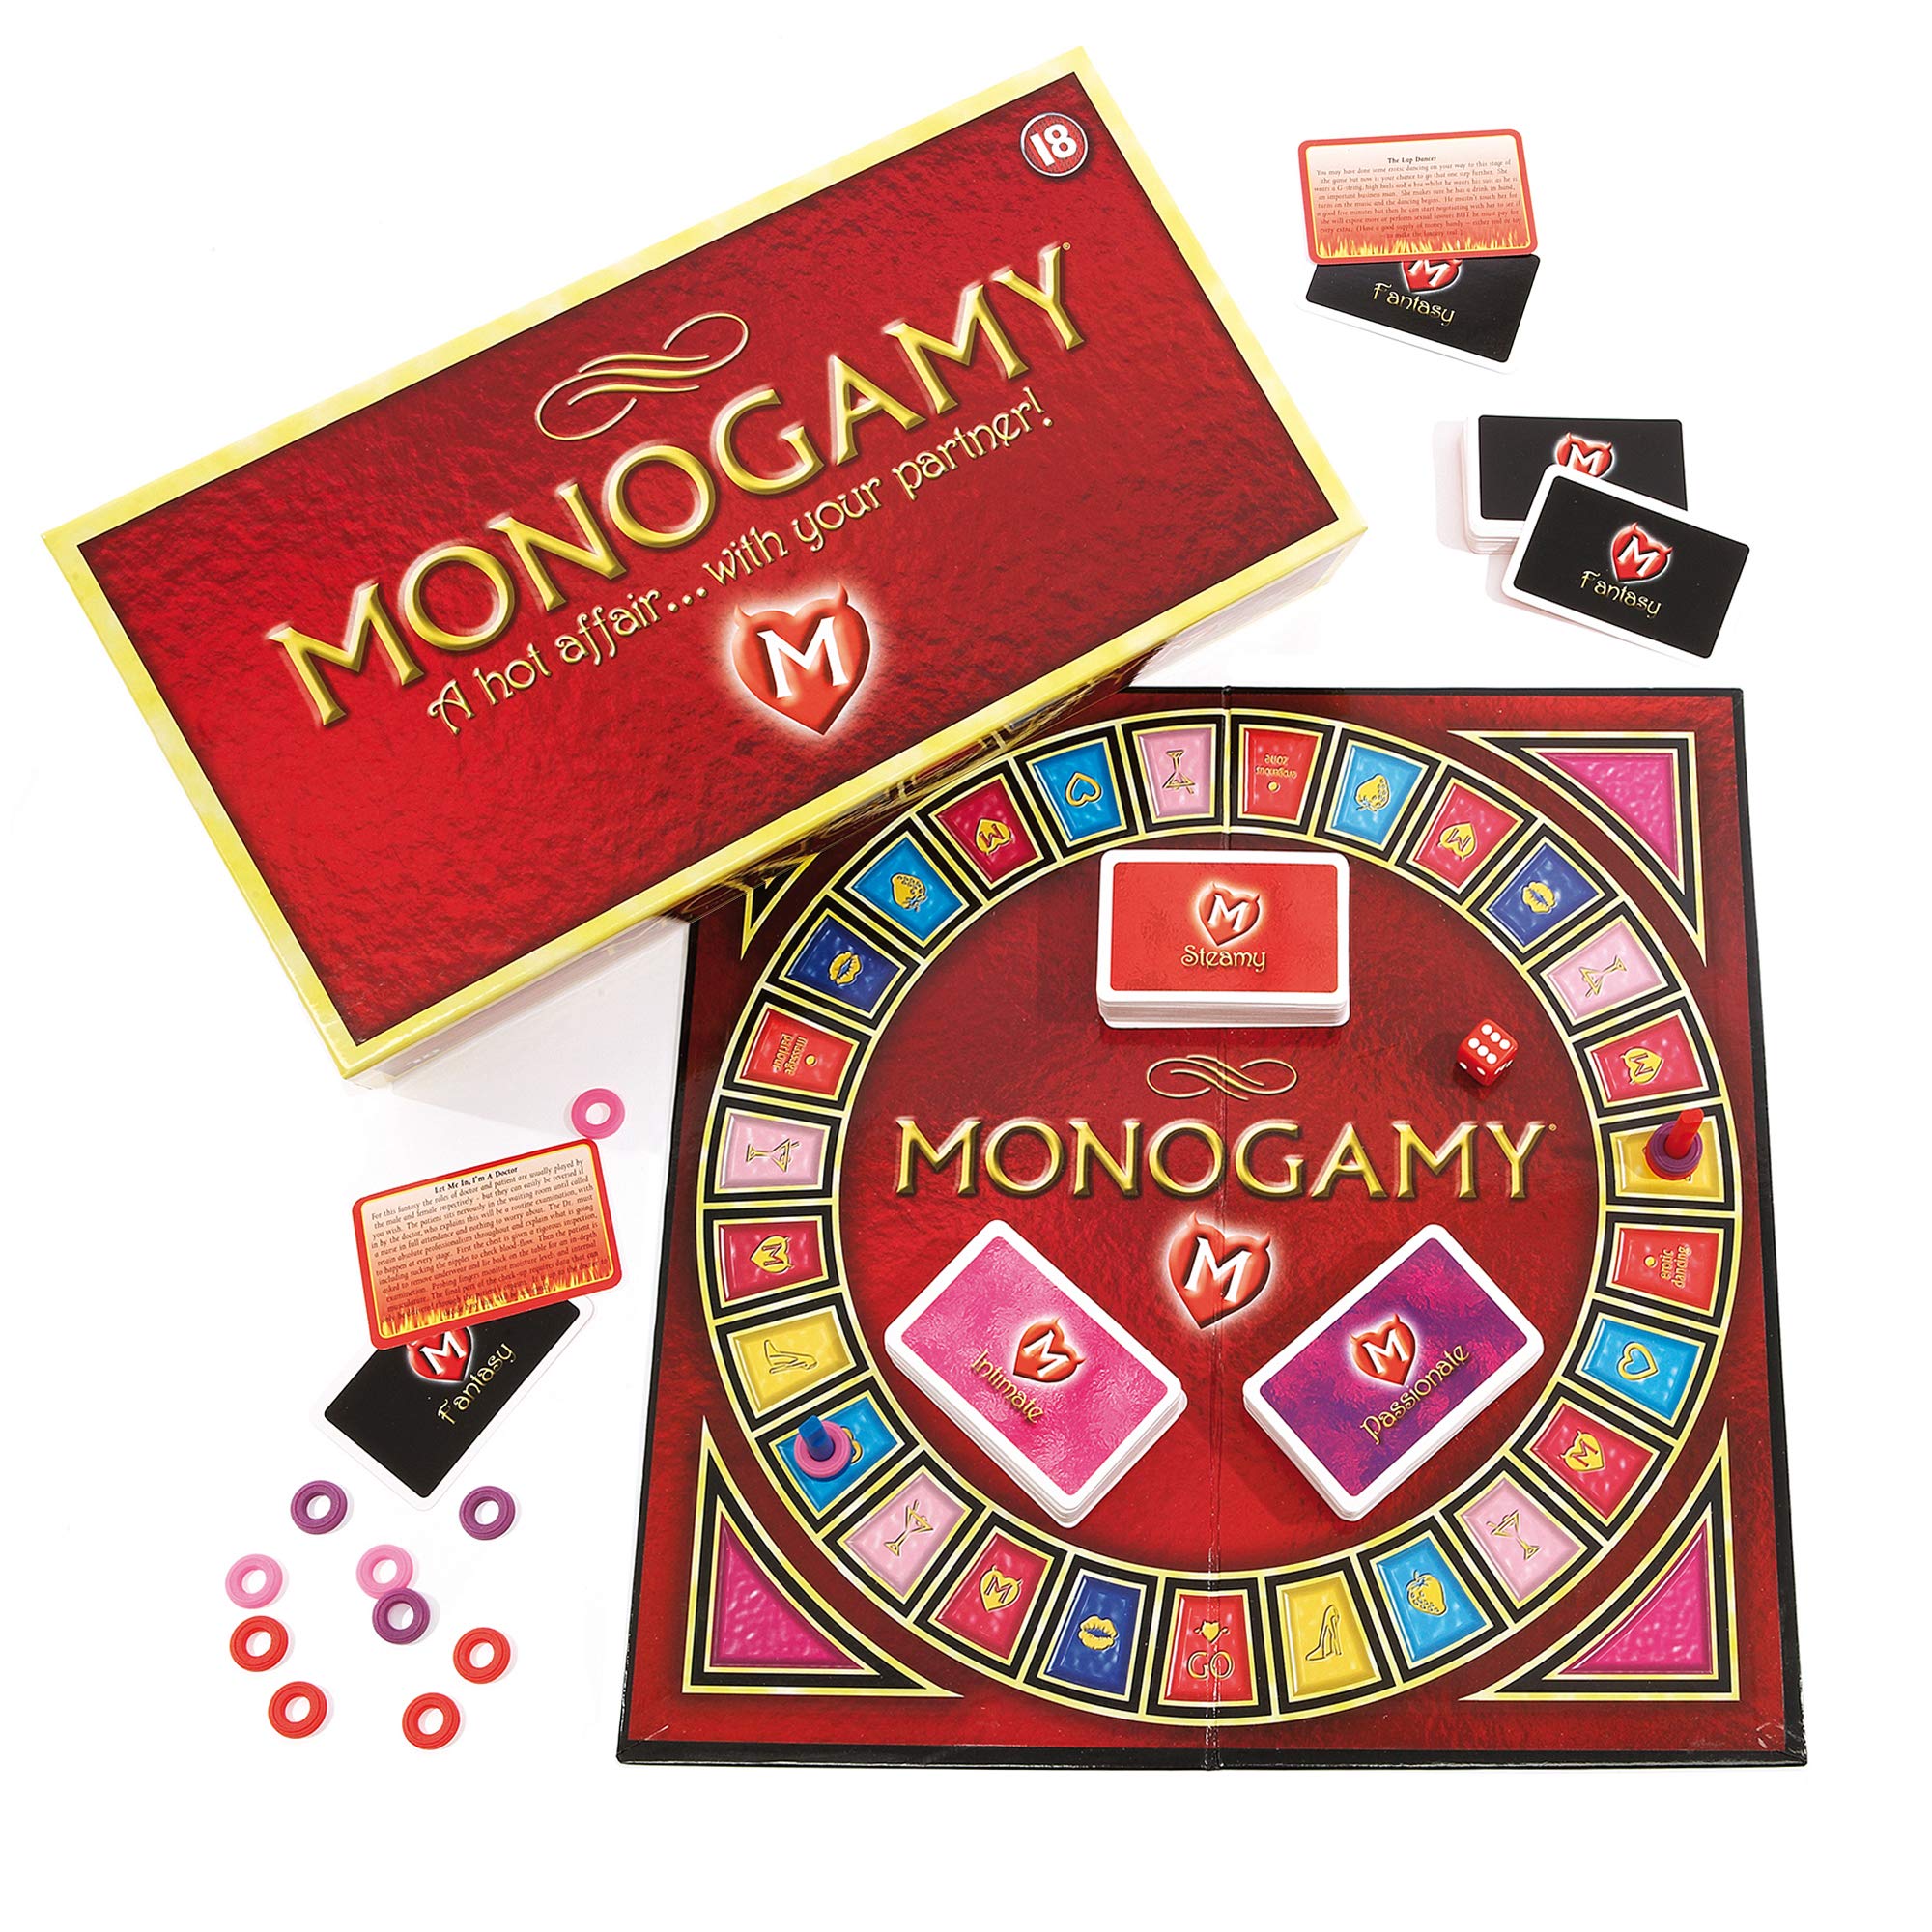 Ann Summers Monogamy Couples Board Game